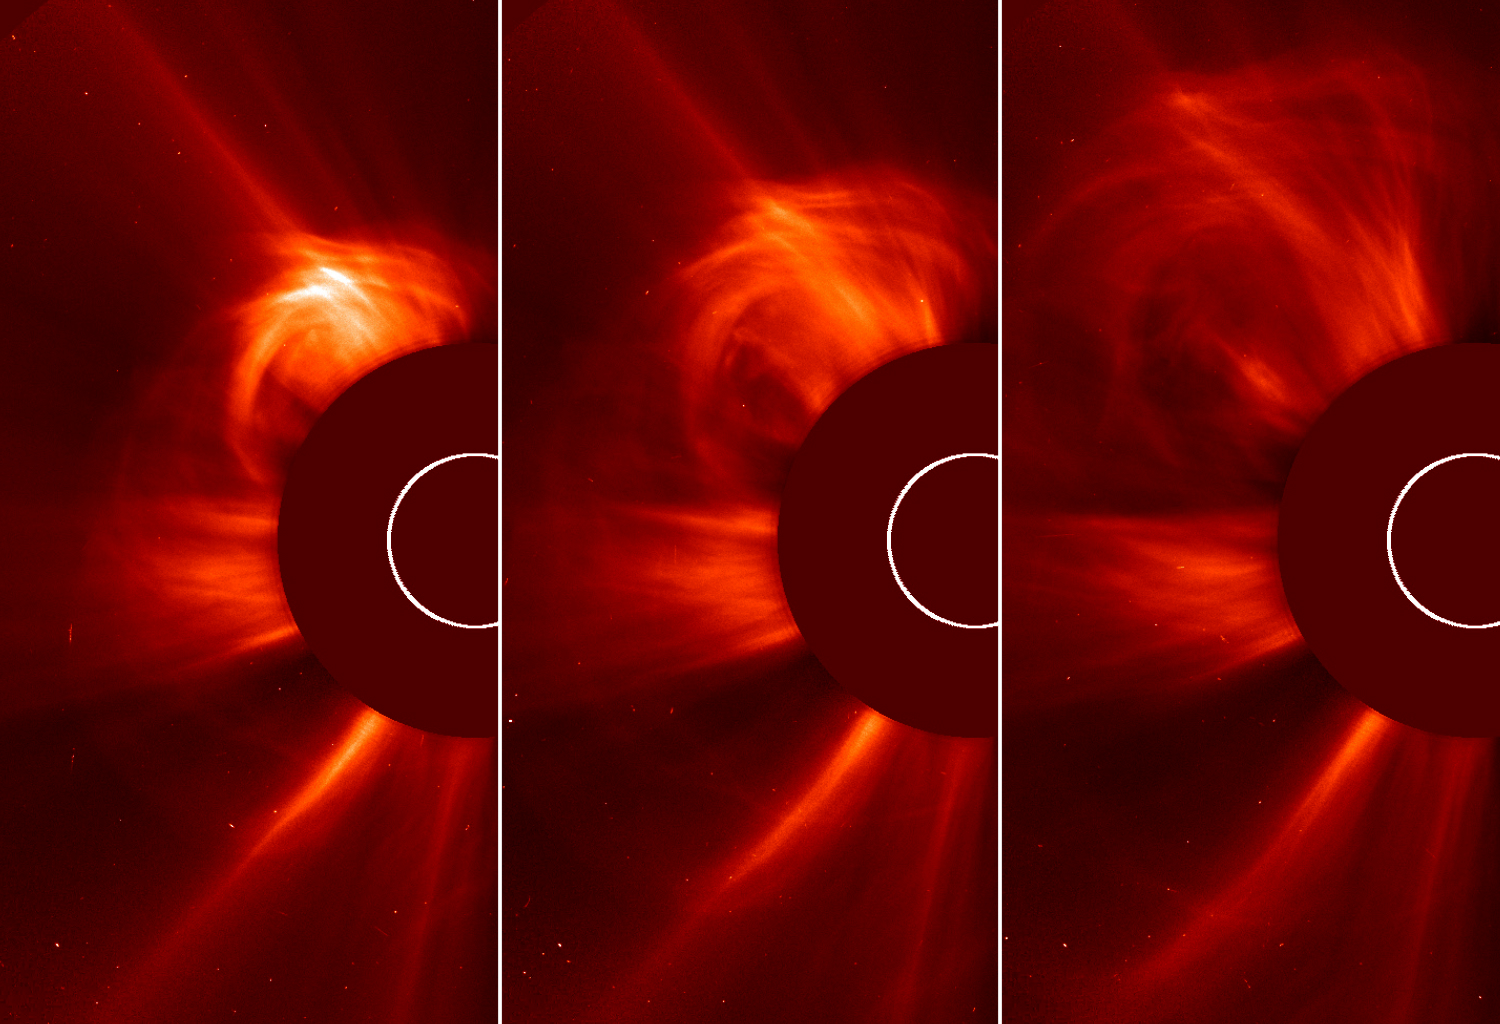 The ESA and NASA Solar Heliospheric Observatory (SOHO) captured these images of the sun spitting out a coronal mass ejection (CME) on March 15, 2013, from 3:24 to 4:00 a.m. EDT. This type of image is known as a coronagraph, since a disk is placed over the sun to better see the dimmer atmosphere around it, called the corona.  No Labels Credit: ESA&NASA/SOHO 